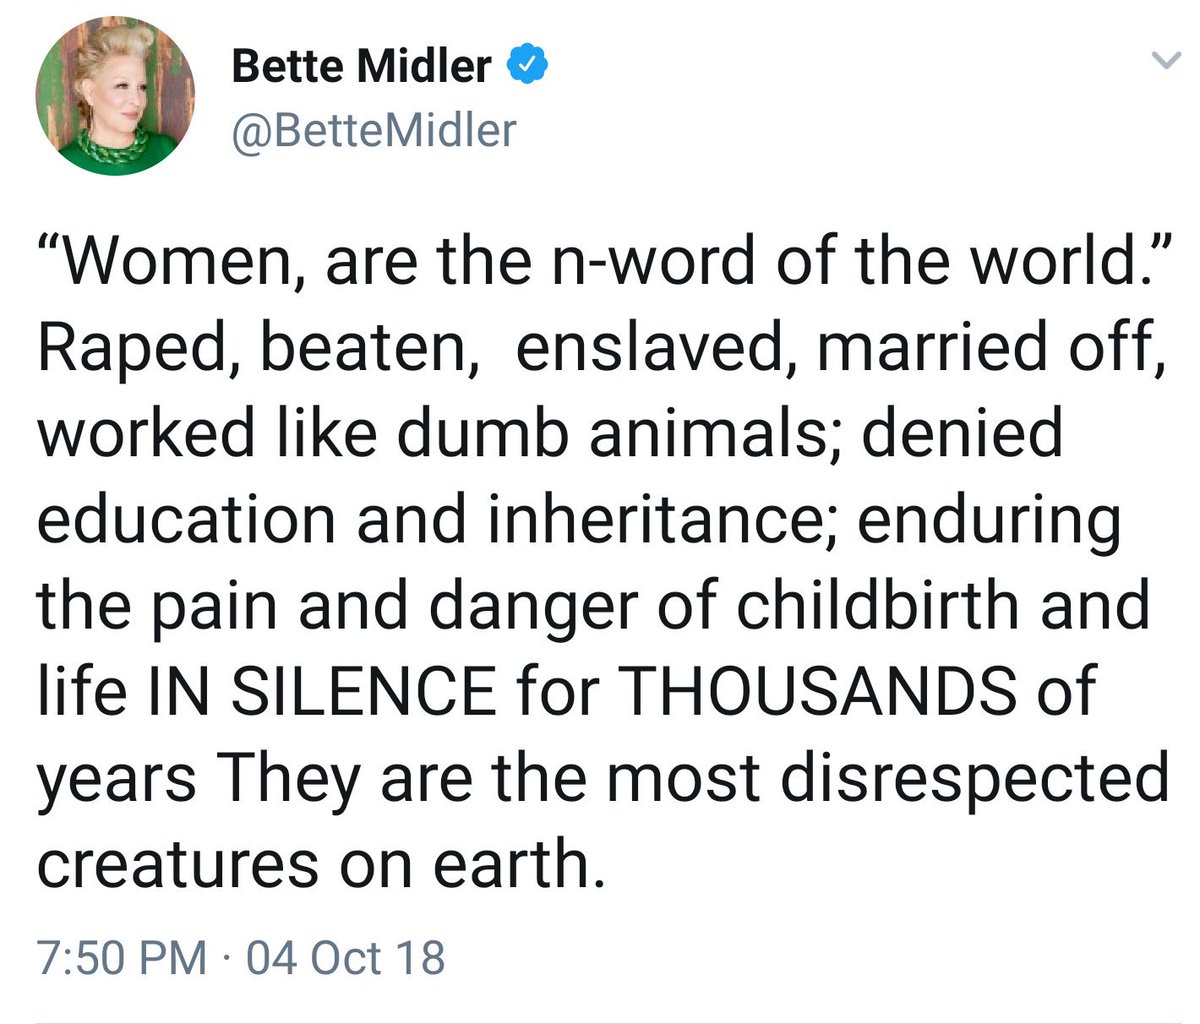 Bette Midler deletes tweet claiming women are the N-Word of the world